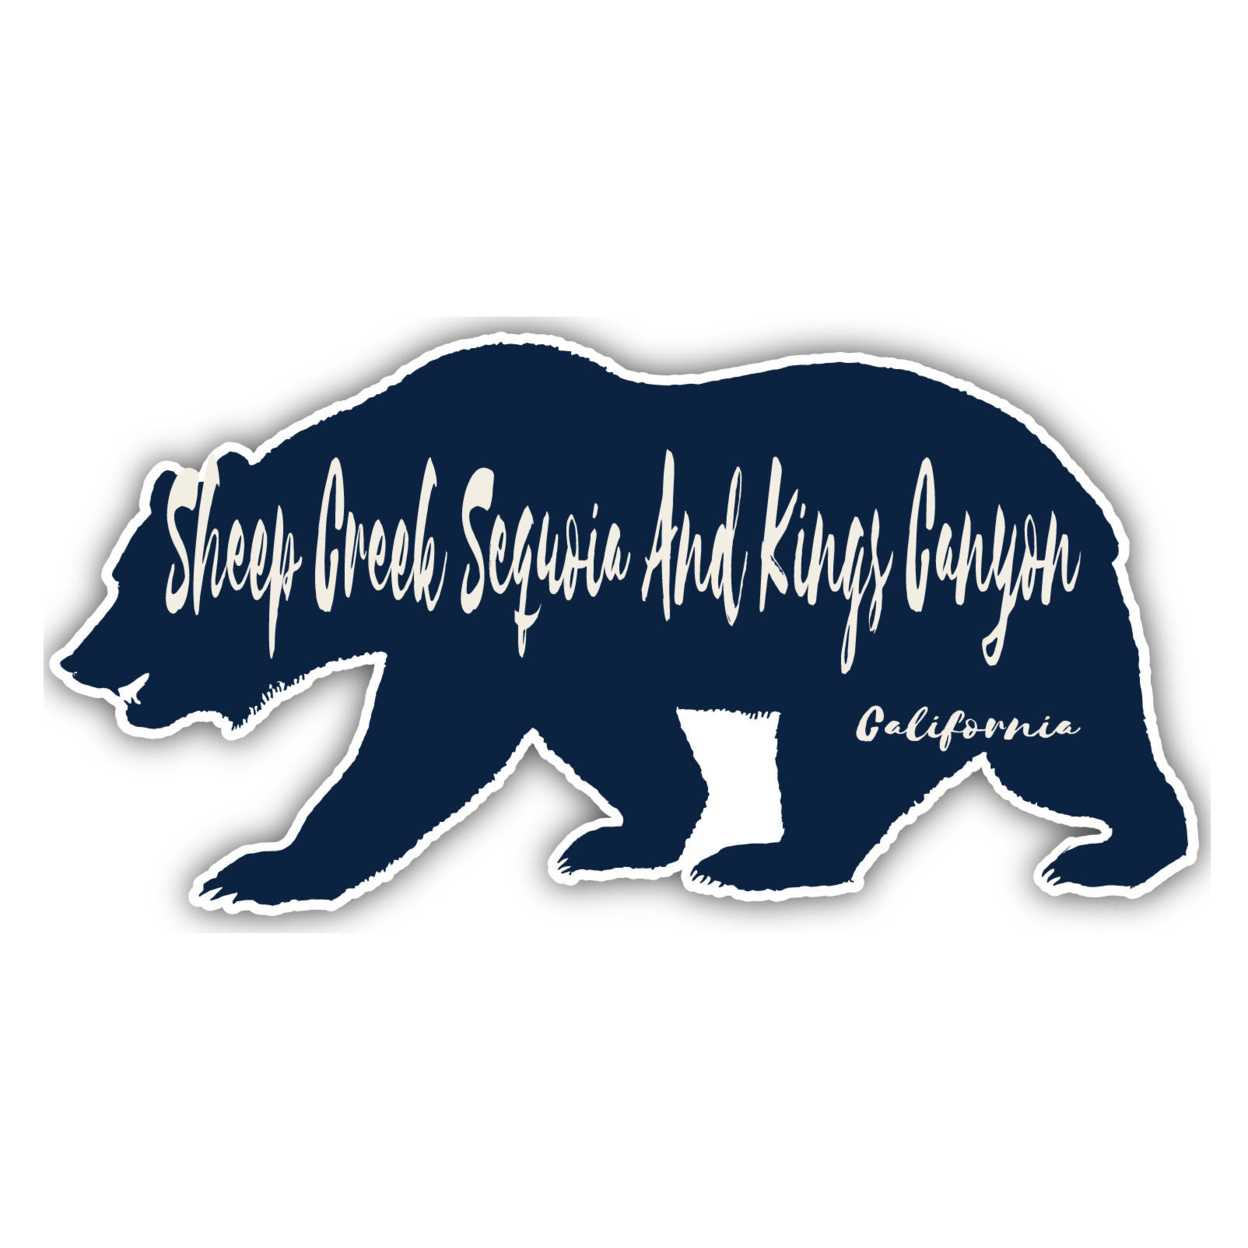 Sheep Creek Sequoia And Kings Canyon California Souvenir Decorative Stickers (Choose Theme And Size) - Single Unit, 2-Inch, Bear